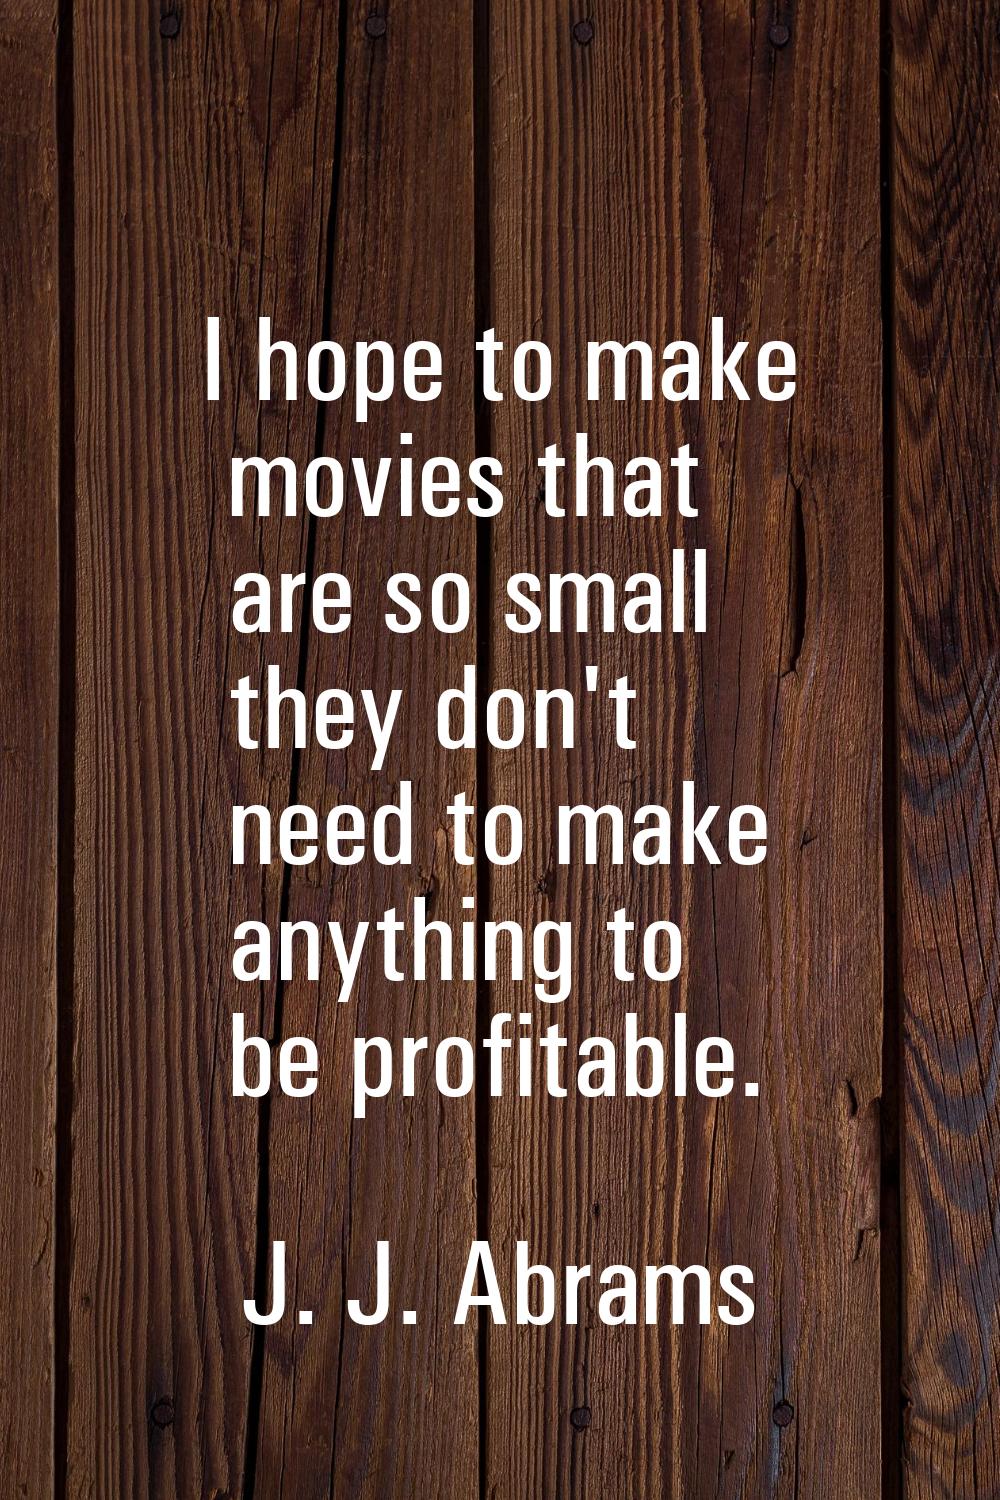 I hope to make movies that are so small they don't need to make anything to be profitable.